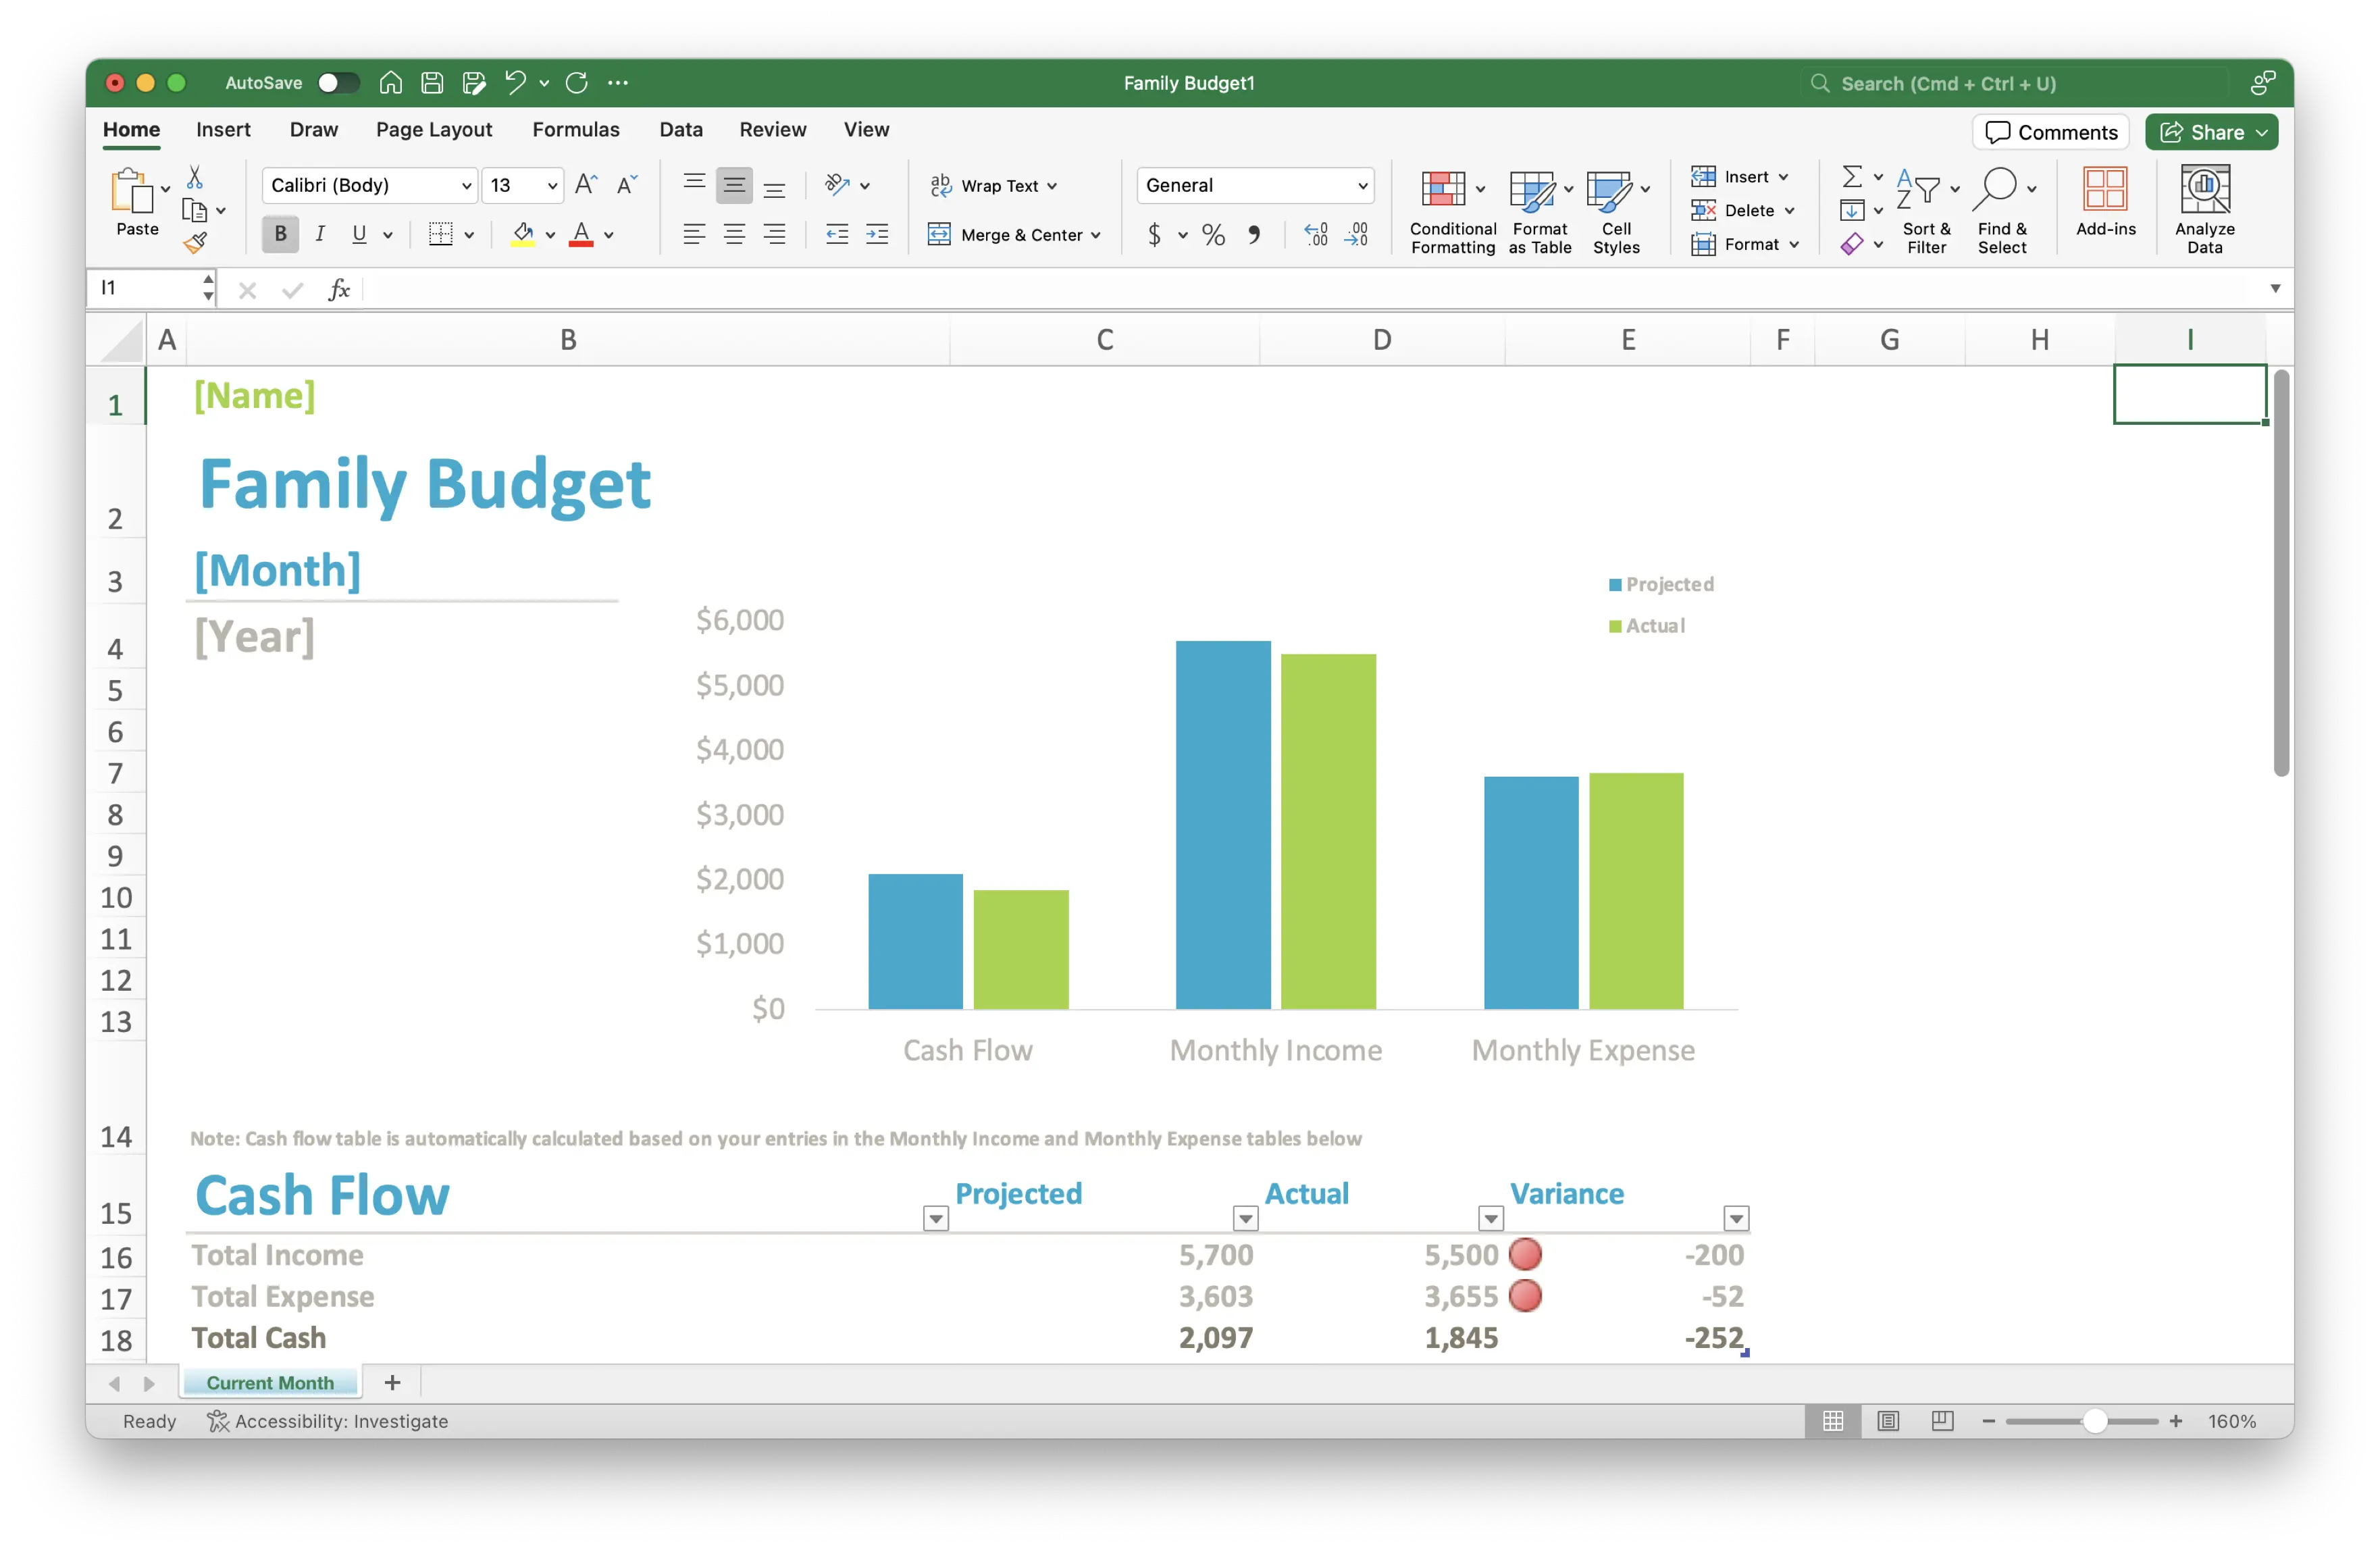 A screenshot of an Excel spreadsheet titled “Family Budget.” The sheet includes sections for entering a name, month, and year. It displays a bar chart comparing projected and actual values for cash flow, monthly income, and monthly expenses. 